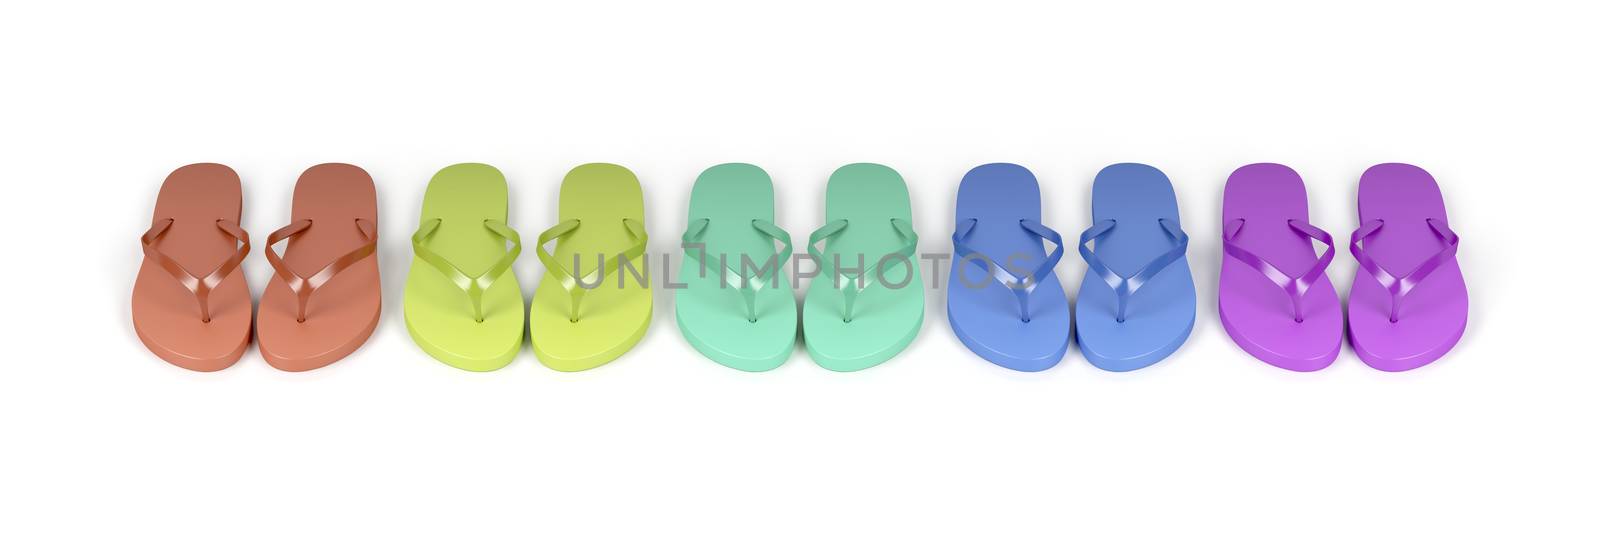 Flip-flops with different colors by magraphics